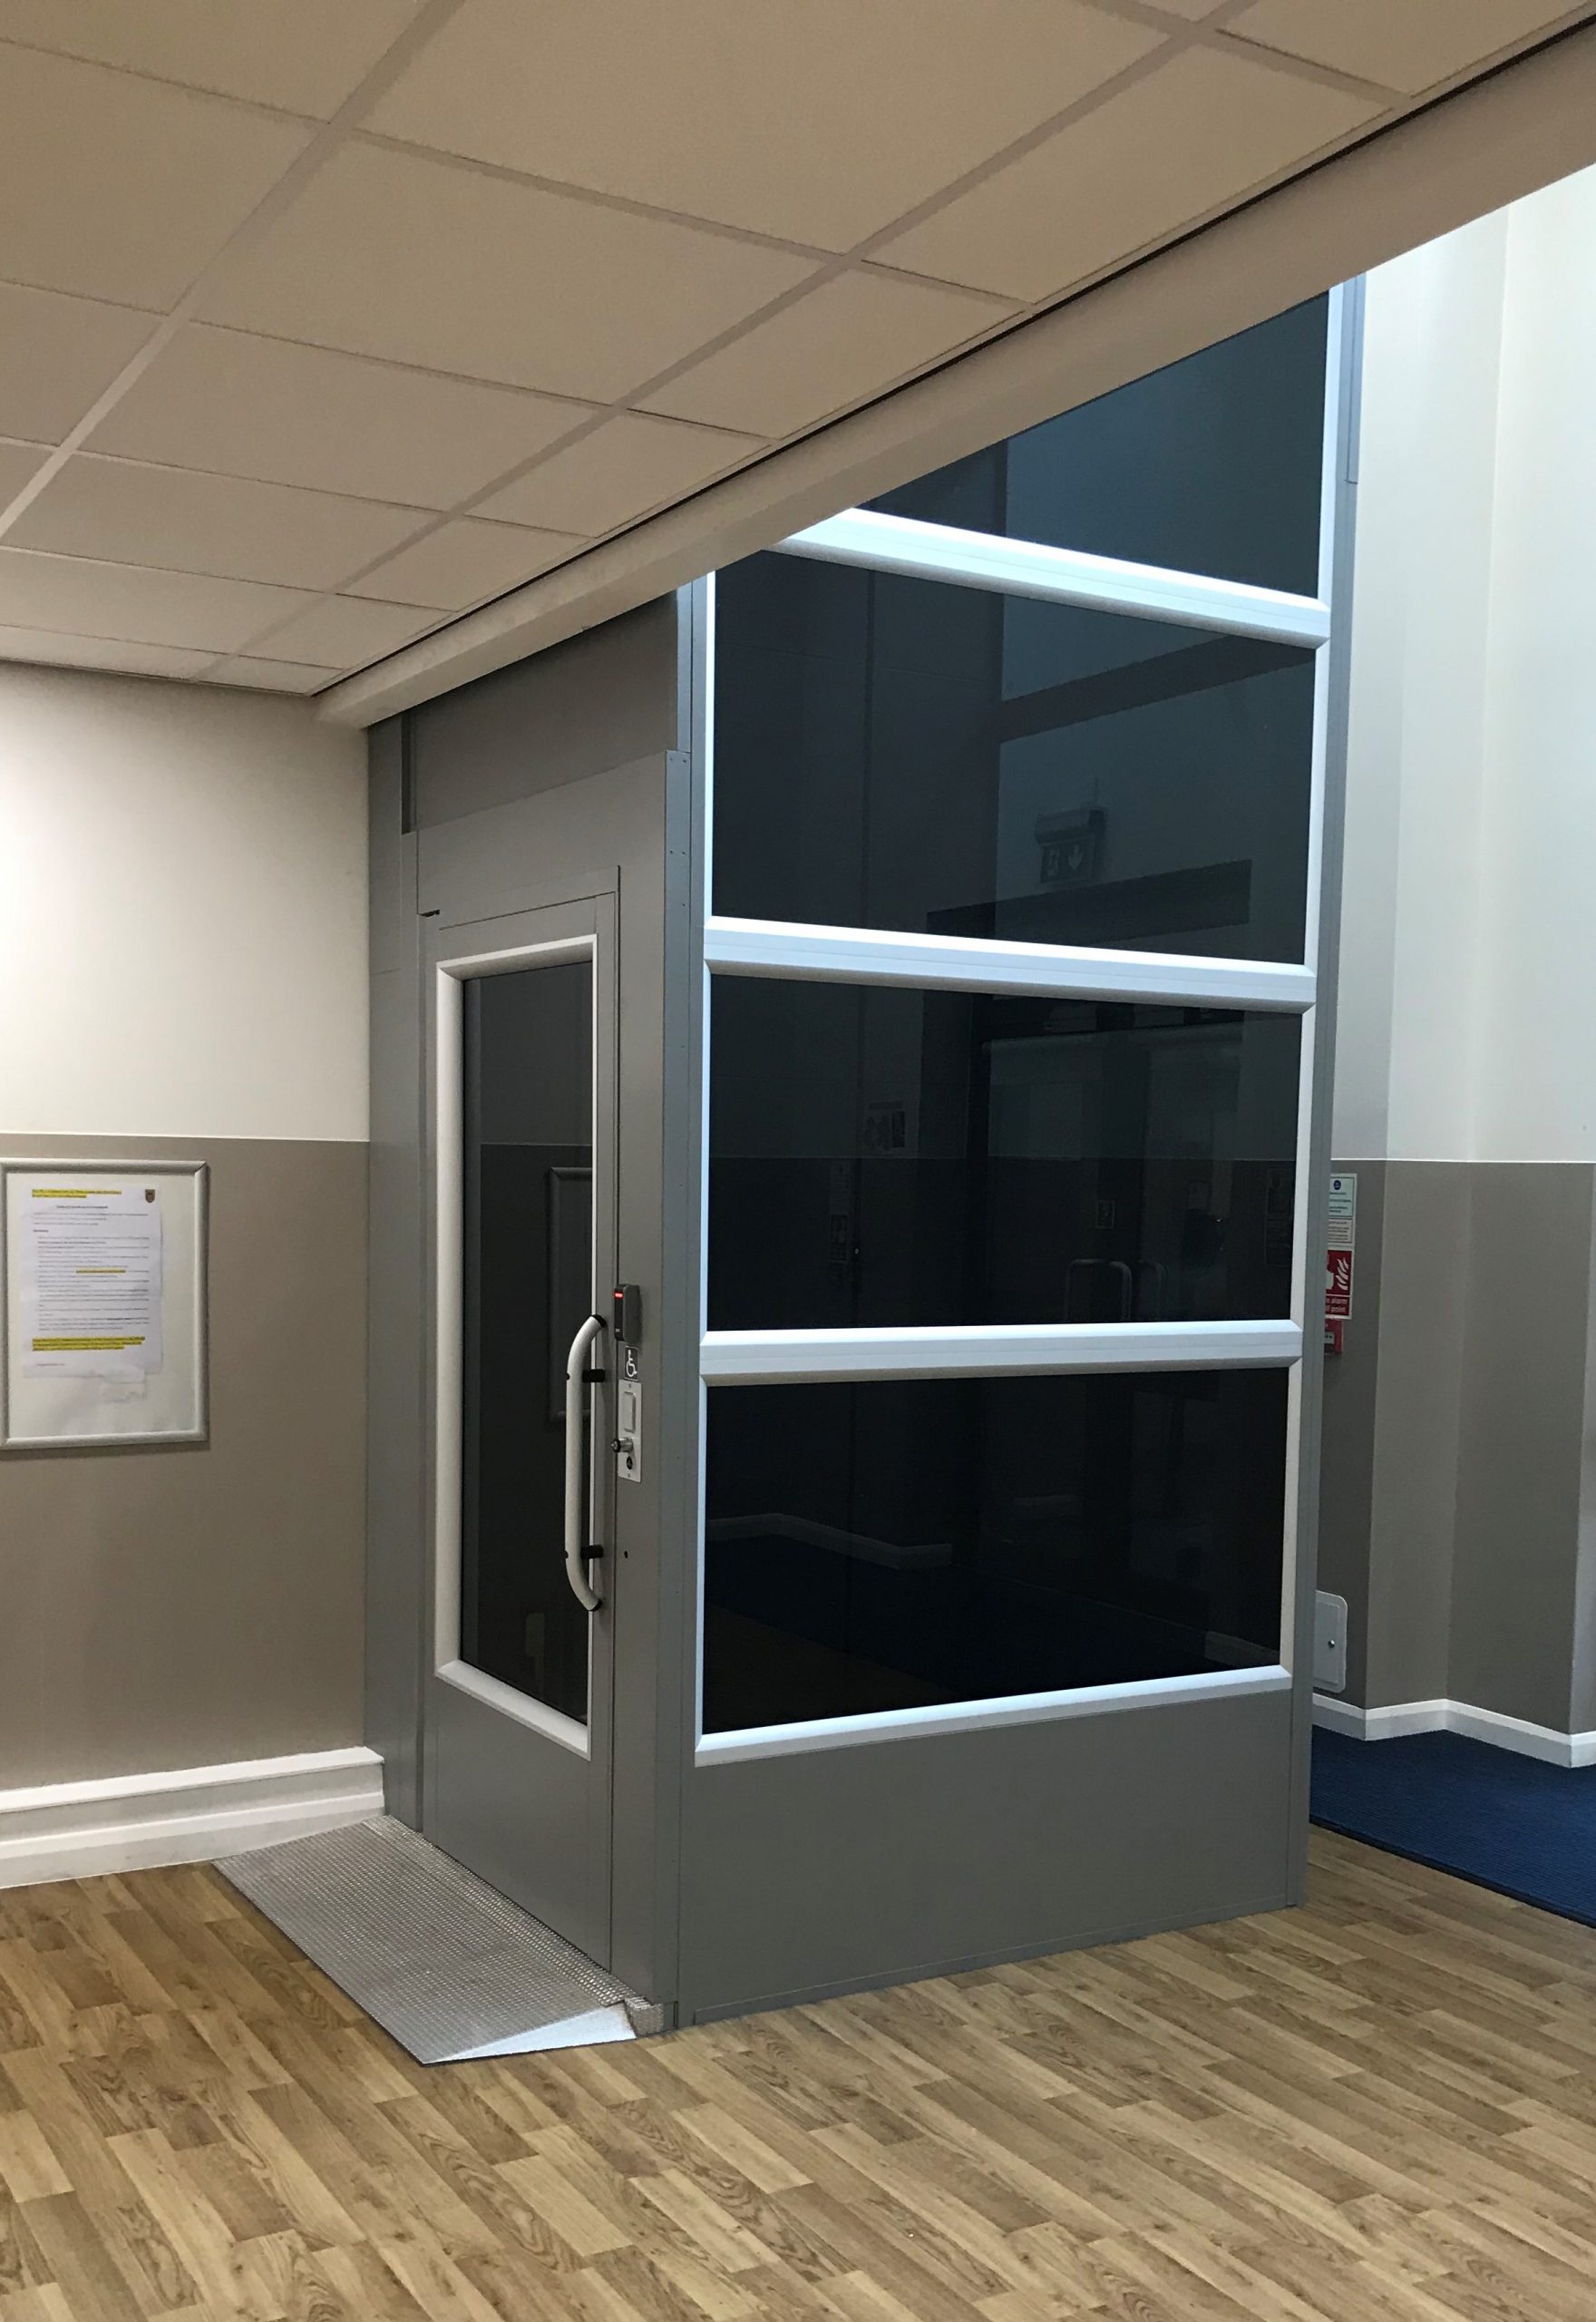 Commercial Platform Lift for Kingsford School @invalifts